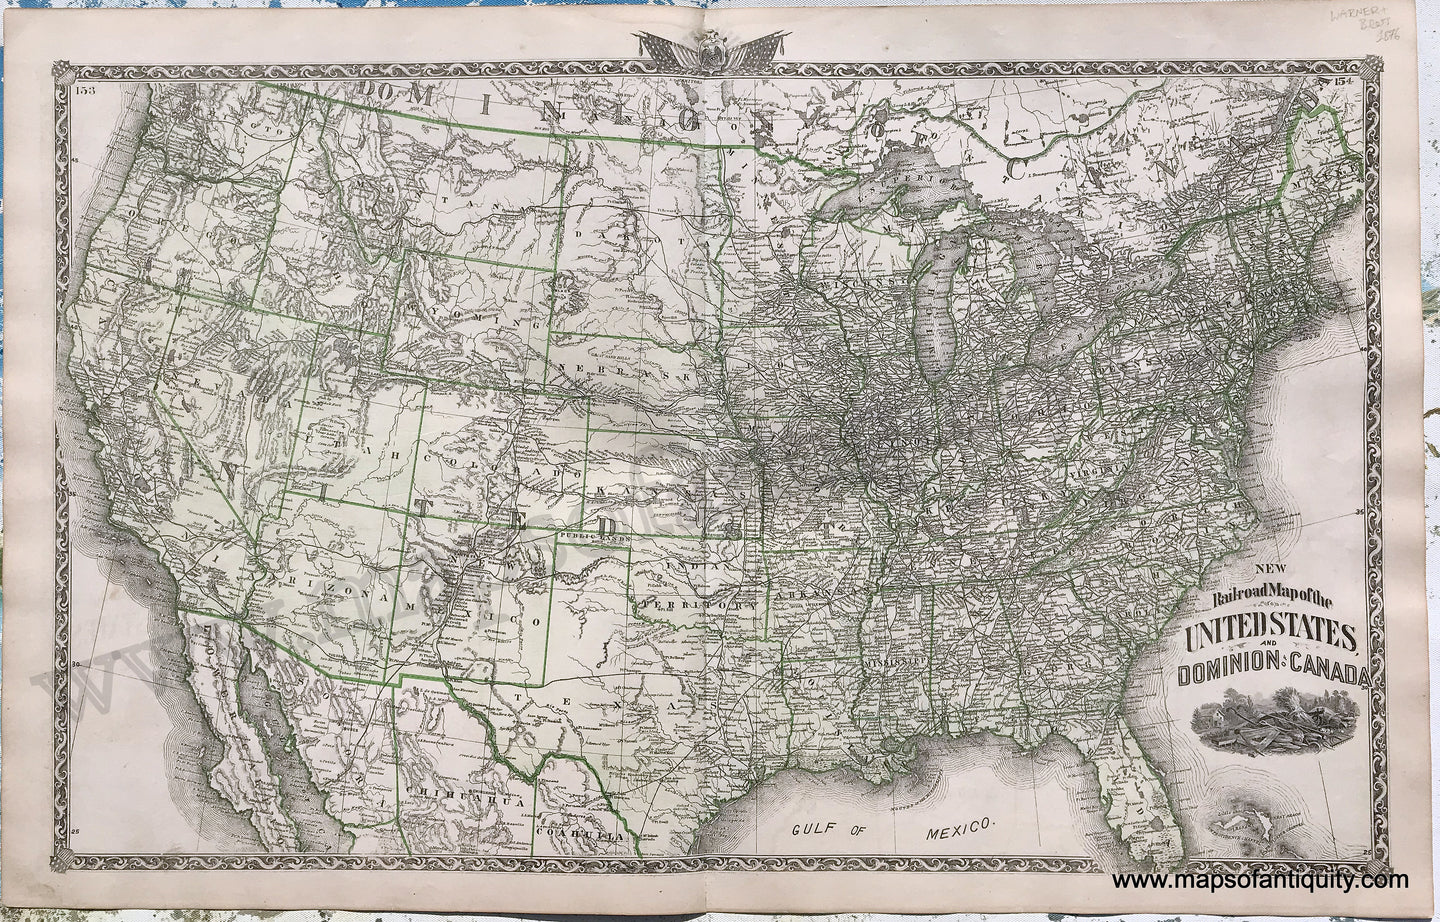 Antique-Hand-Colored-Map-Sheet-with-three-maps:-centerfold--New-Railroad-Map-of-the-United-States-and-Dominion-of-Canada;-versos:-St-Louis-/-Maps-Showing-Amount-of-Products-Raised-in-Proportion-to-Population-and-Acres-of-Improved-Land-in-1870-1876-Warner-&-Beers-/-Union-Atlas-Co.--1800s-19th-century-Maps-of-Antiquity